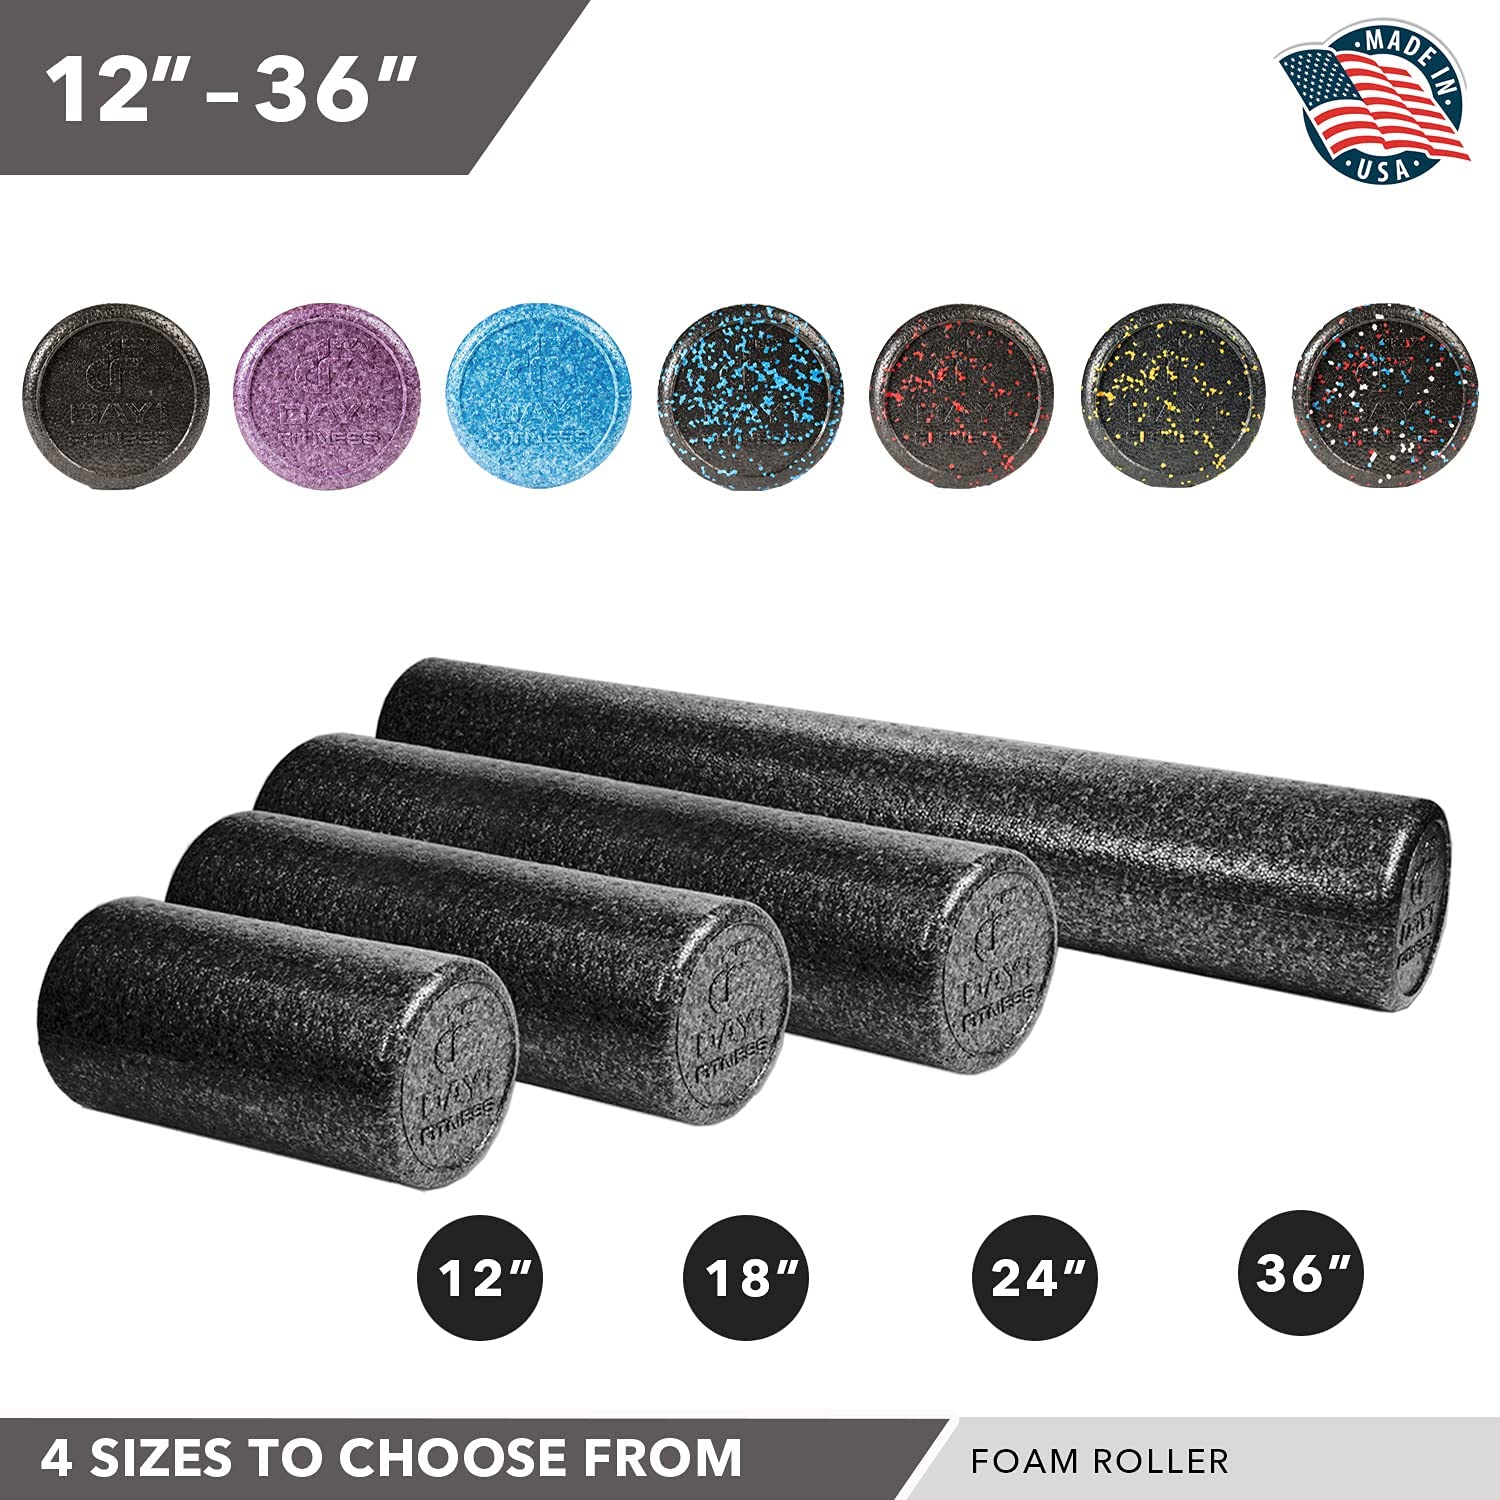 High Density Muscle Foam Rollers - Sports Massage Rollers for Stretching, Physical Therapy, Deep Tissue and Myofascial Release - Ideal for Exercise and Pain Relief